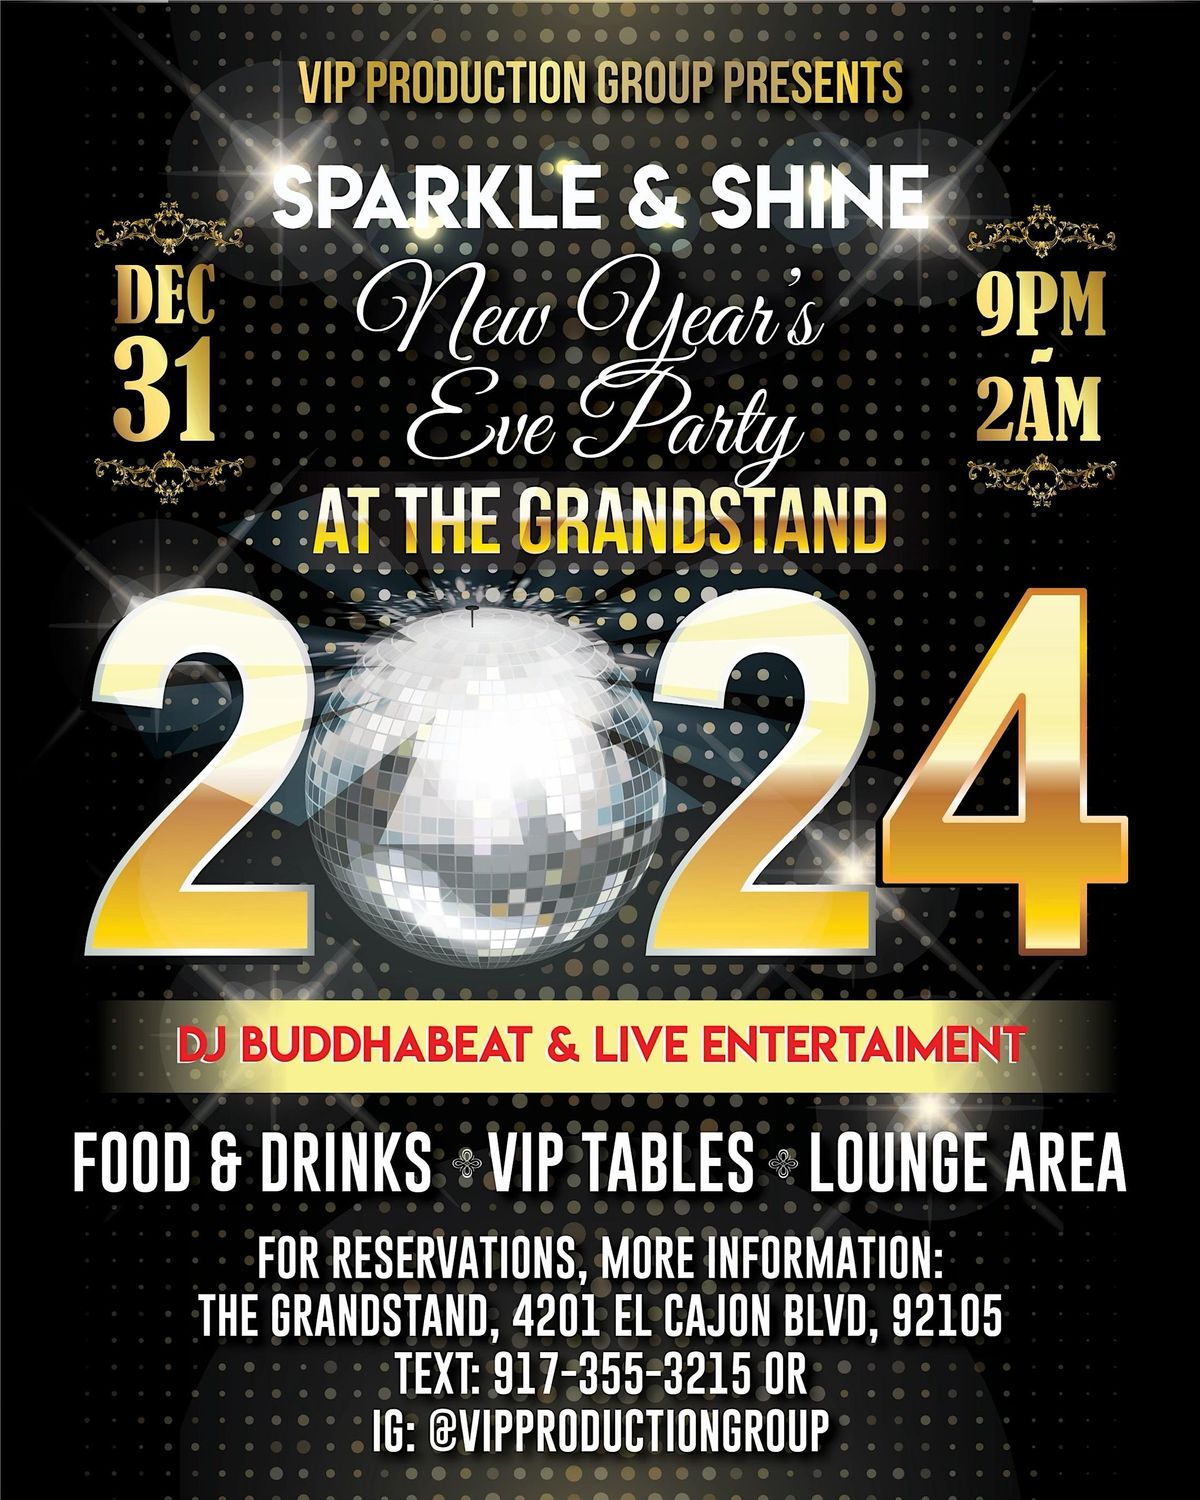 Sparkle & Shine NYE Party at The Grandstand